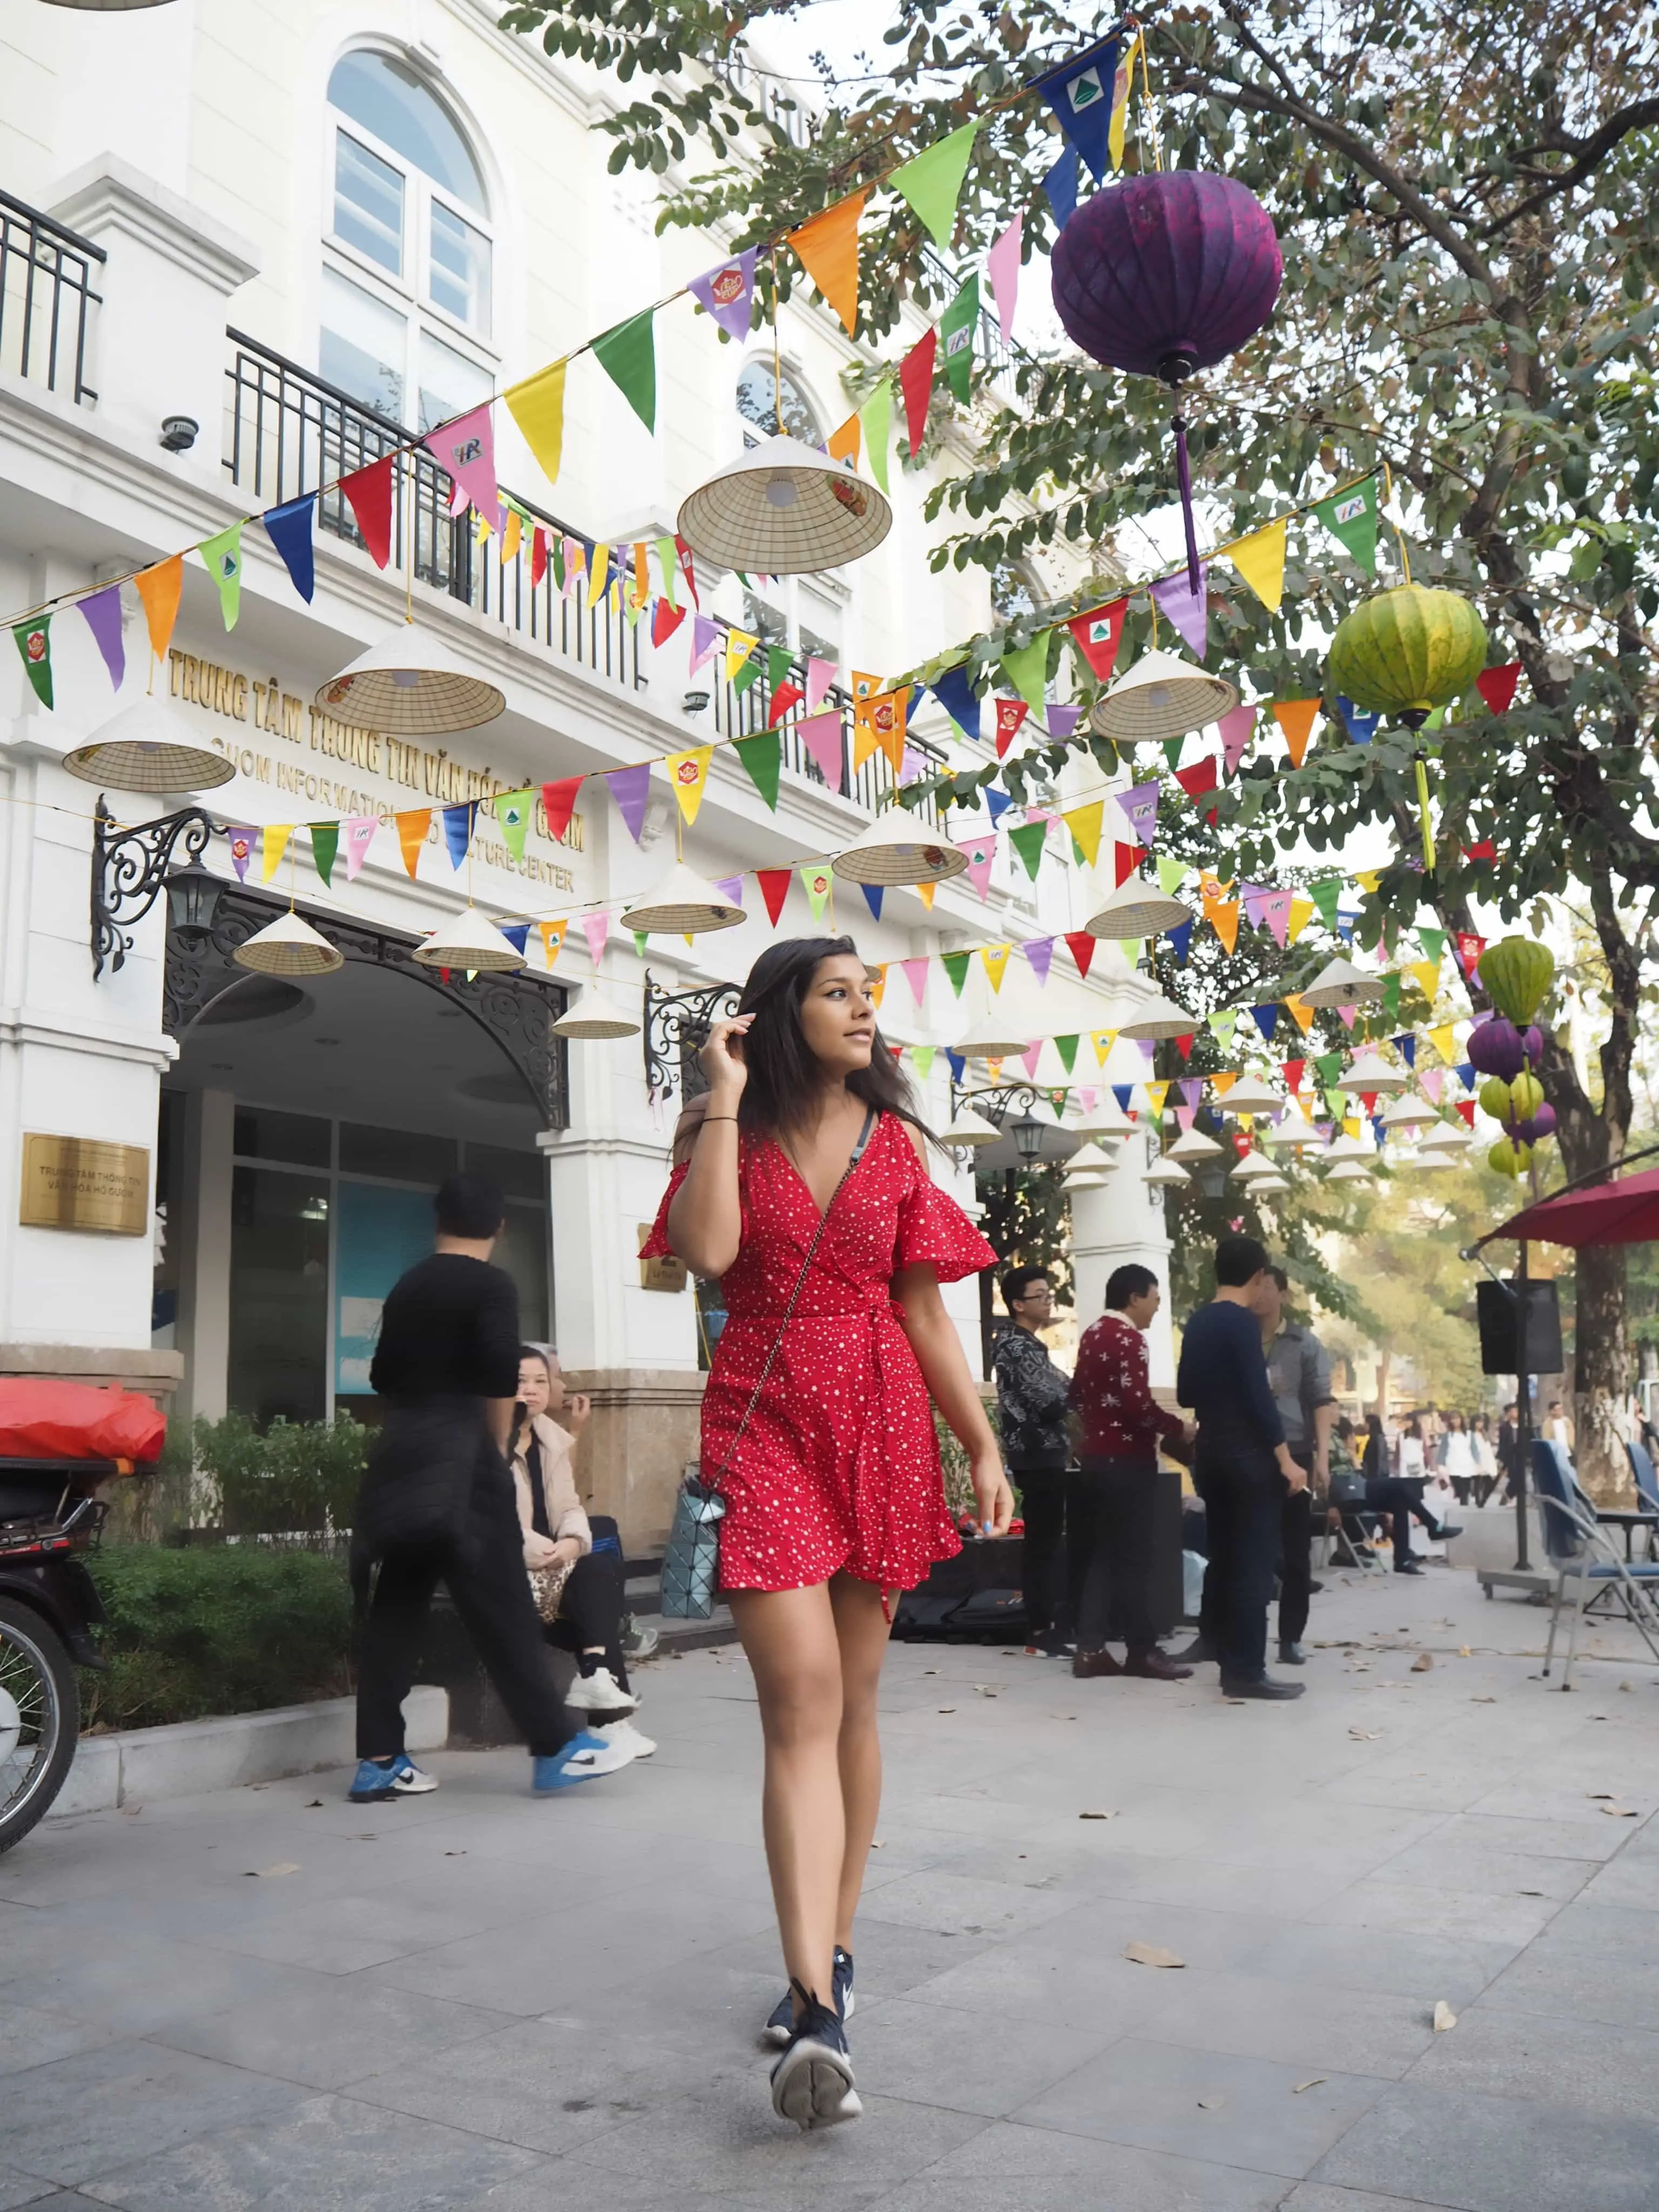 Vietnam - 5 Fun things to do in Hanoi - The Style Traveller